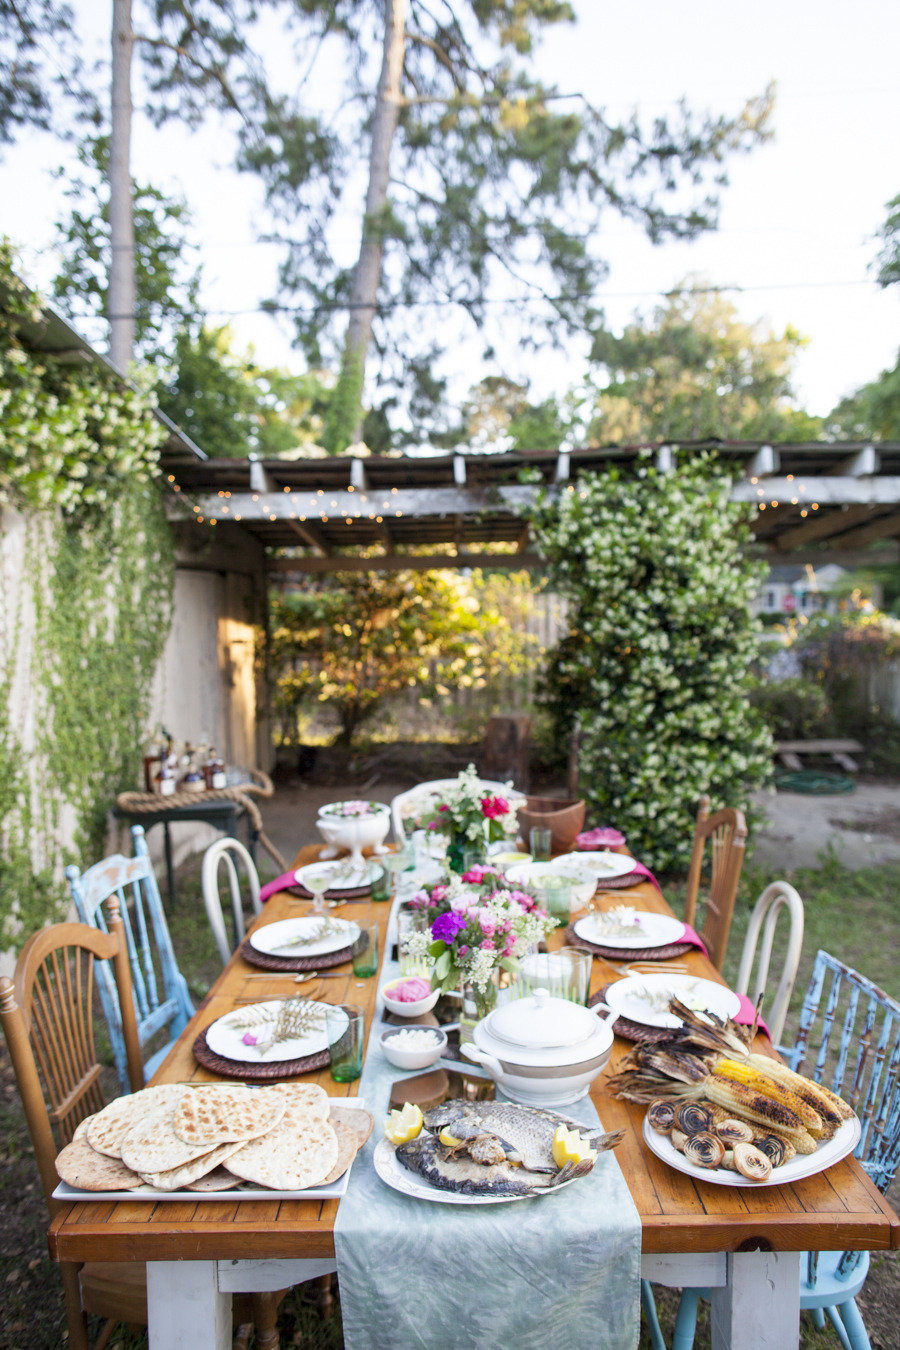 Rustic Backyard Party Ideas
 50 Outdoor Party Ideas You Should Try Out This Summer